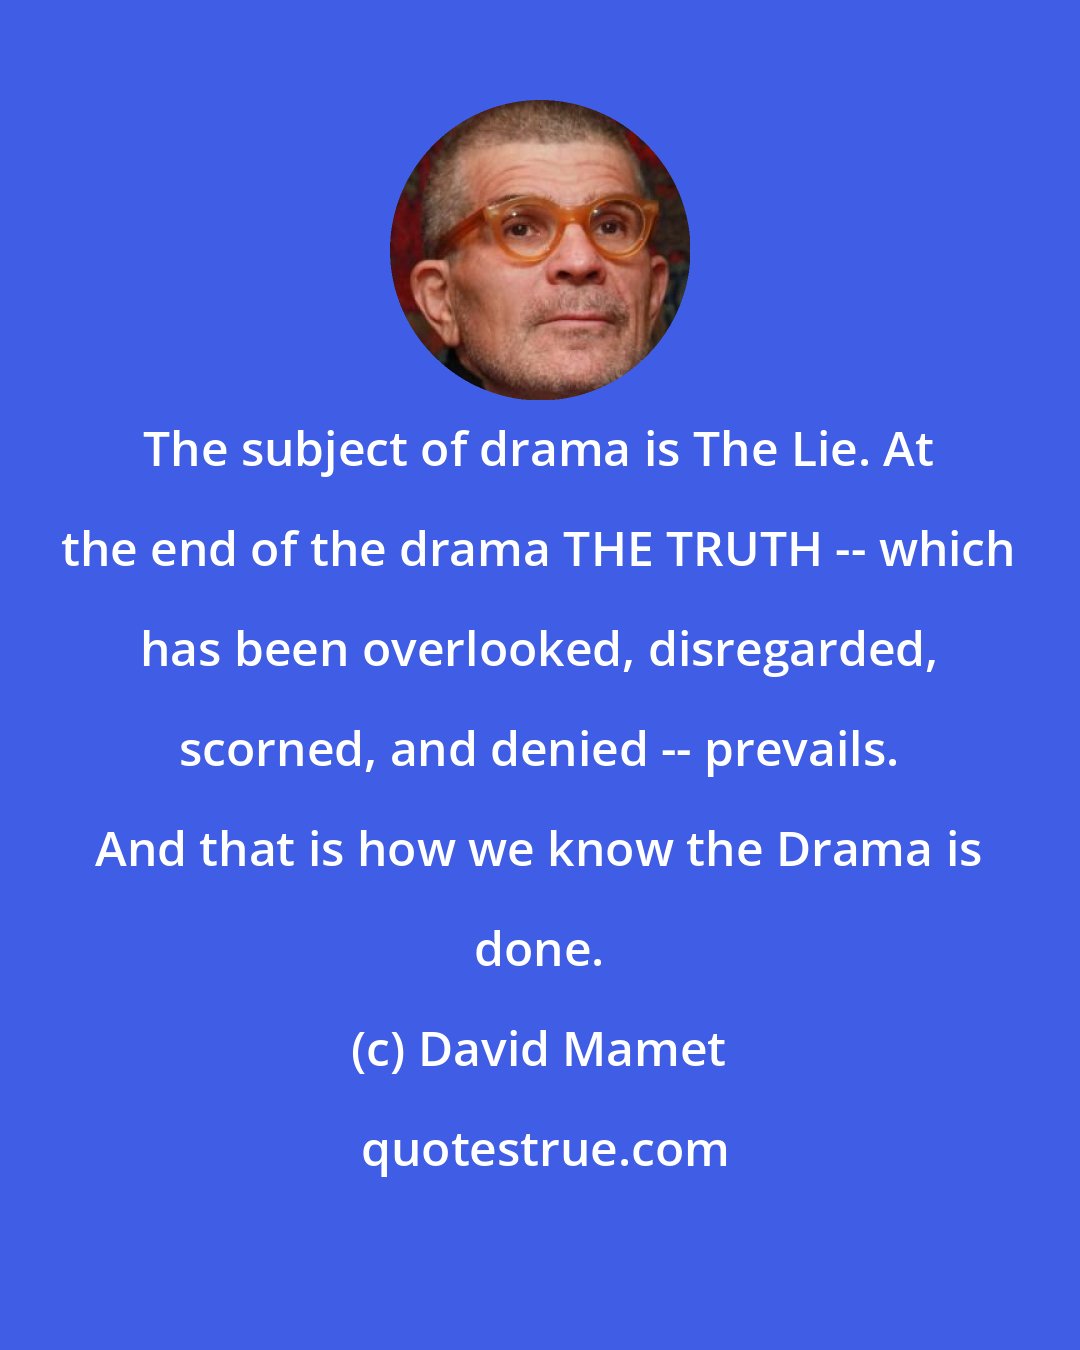 David Mamet: The subject of drama is The Lie. At the end of the drama THE TRUTH -- which has been overlooked, disregarded, scorned, and denied -- prevails. And that is how we know the Drama is done.